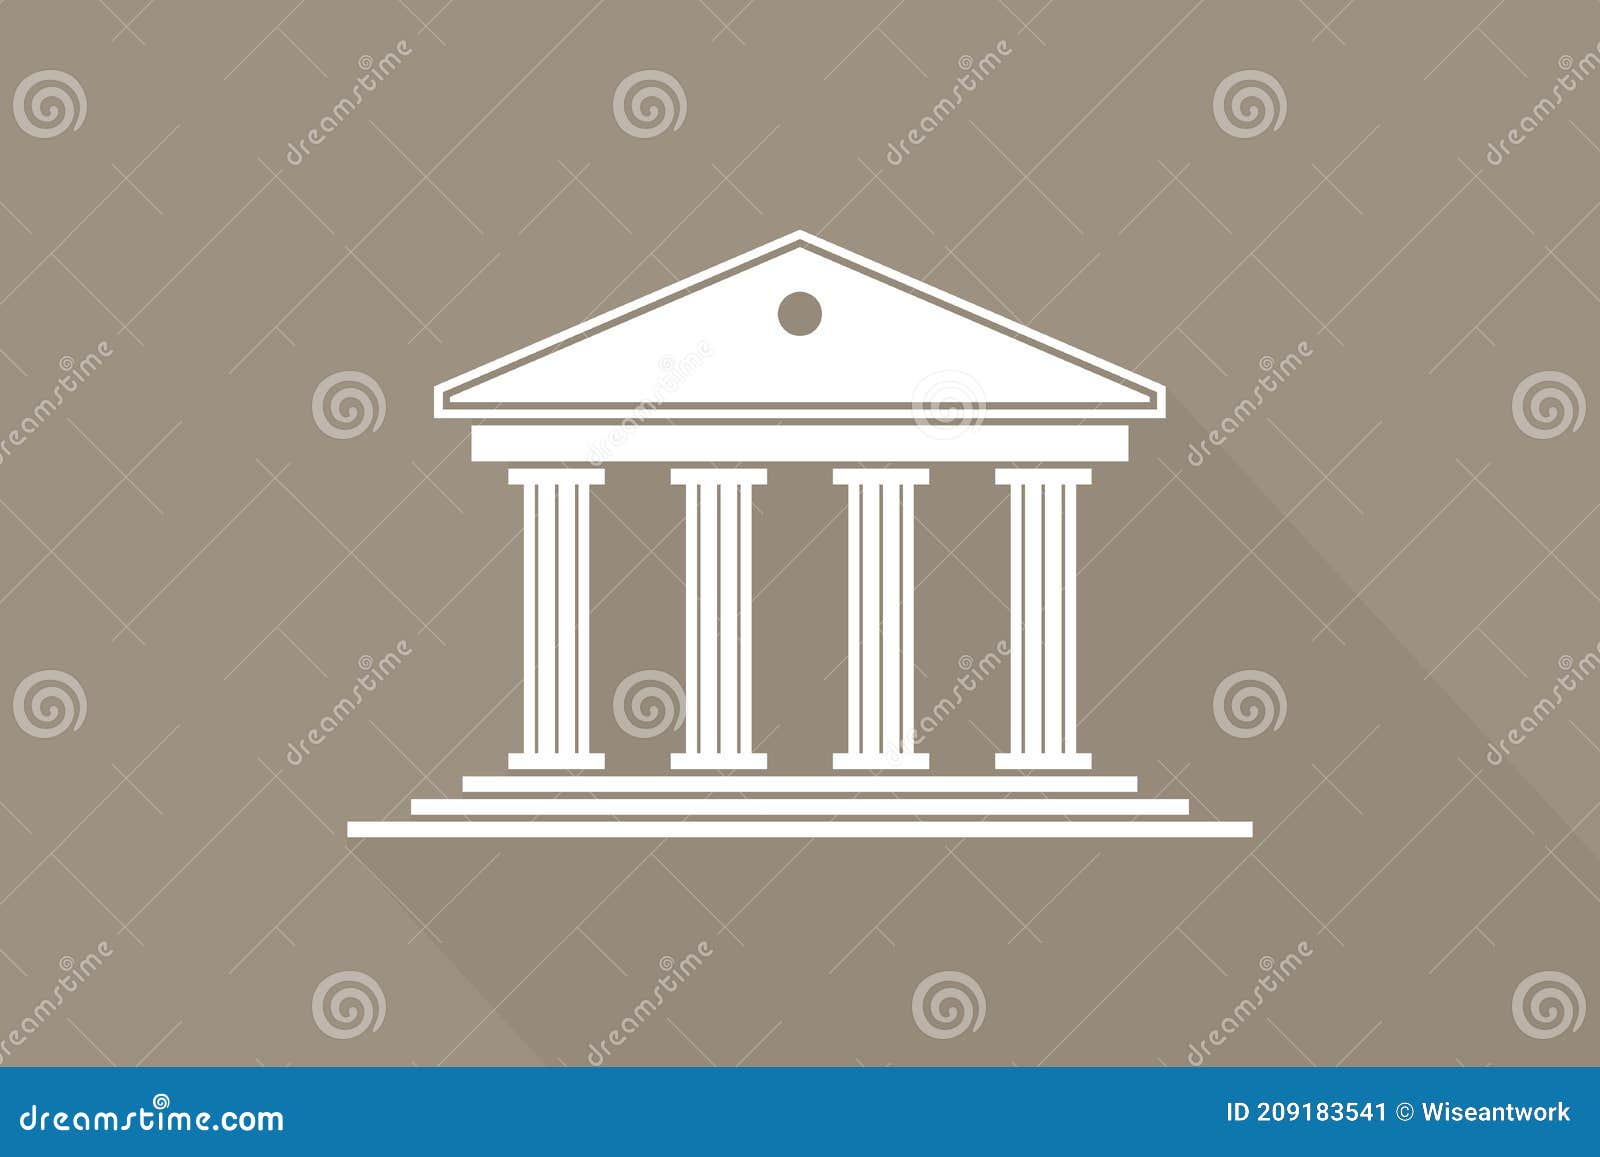 greek temple. icon of roman parthenon. ancient building with columns. greece architecture with pillar and acropolis. white logo of